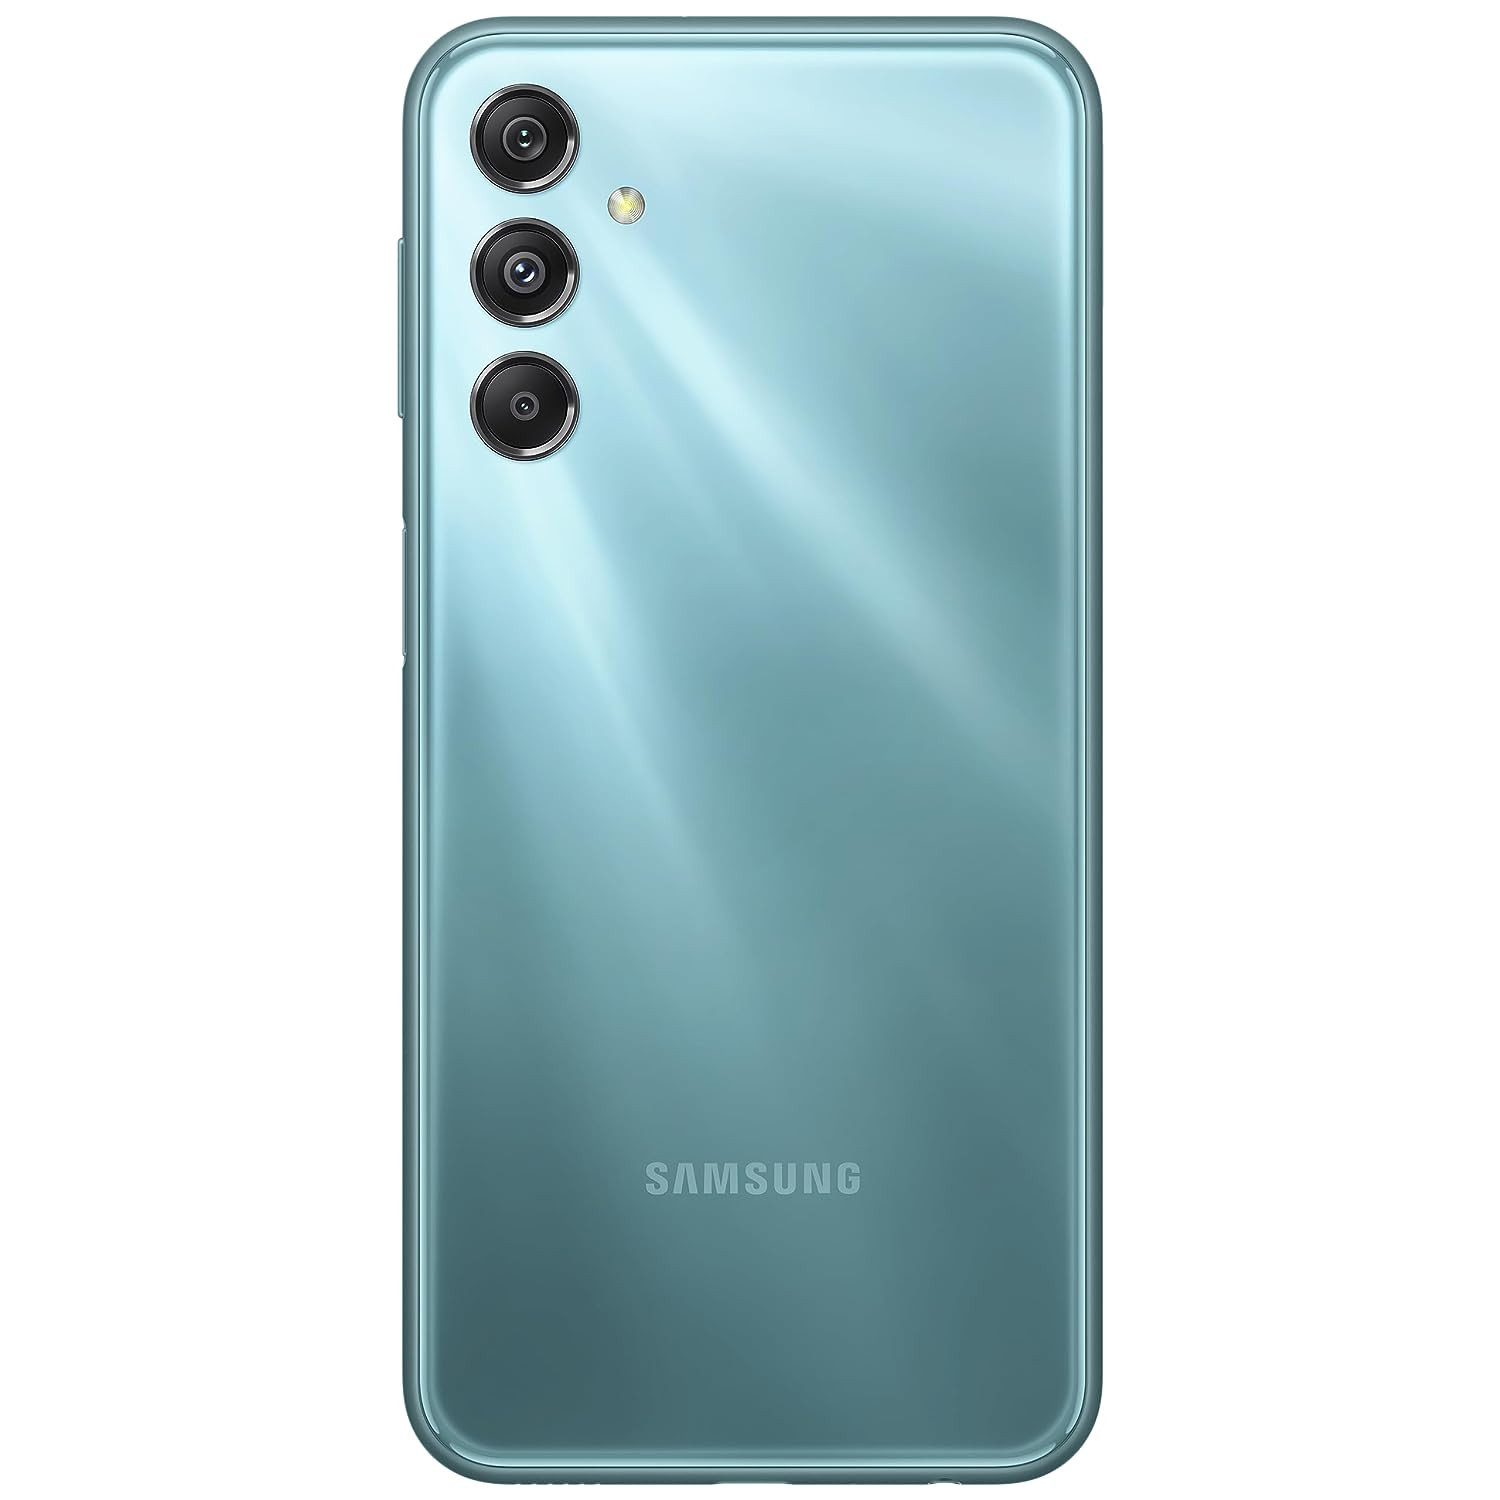 Samsung Galaxy M34 5G (Waterfall Blue,8GB,128GB)|120Hz sAMOLED Display|50MP Triple No Shake Cam|6000 mAh Battery|4 Gen OS Upgrade & 5 Year Security Update|16GB RAM with RAM+|Android 13|Without Charger